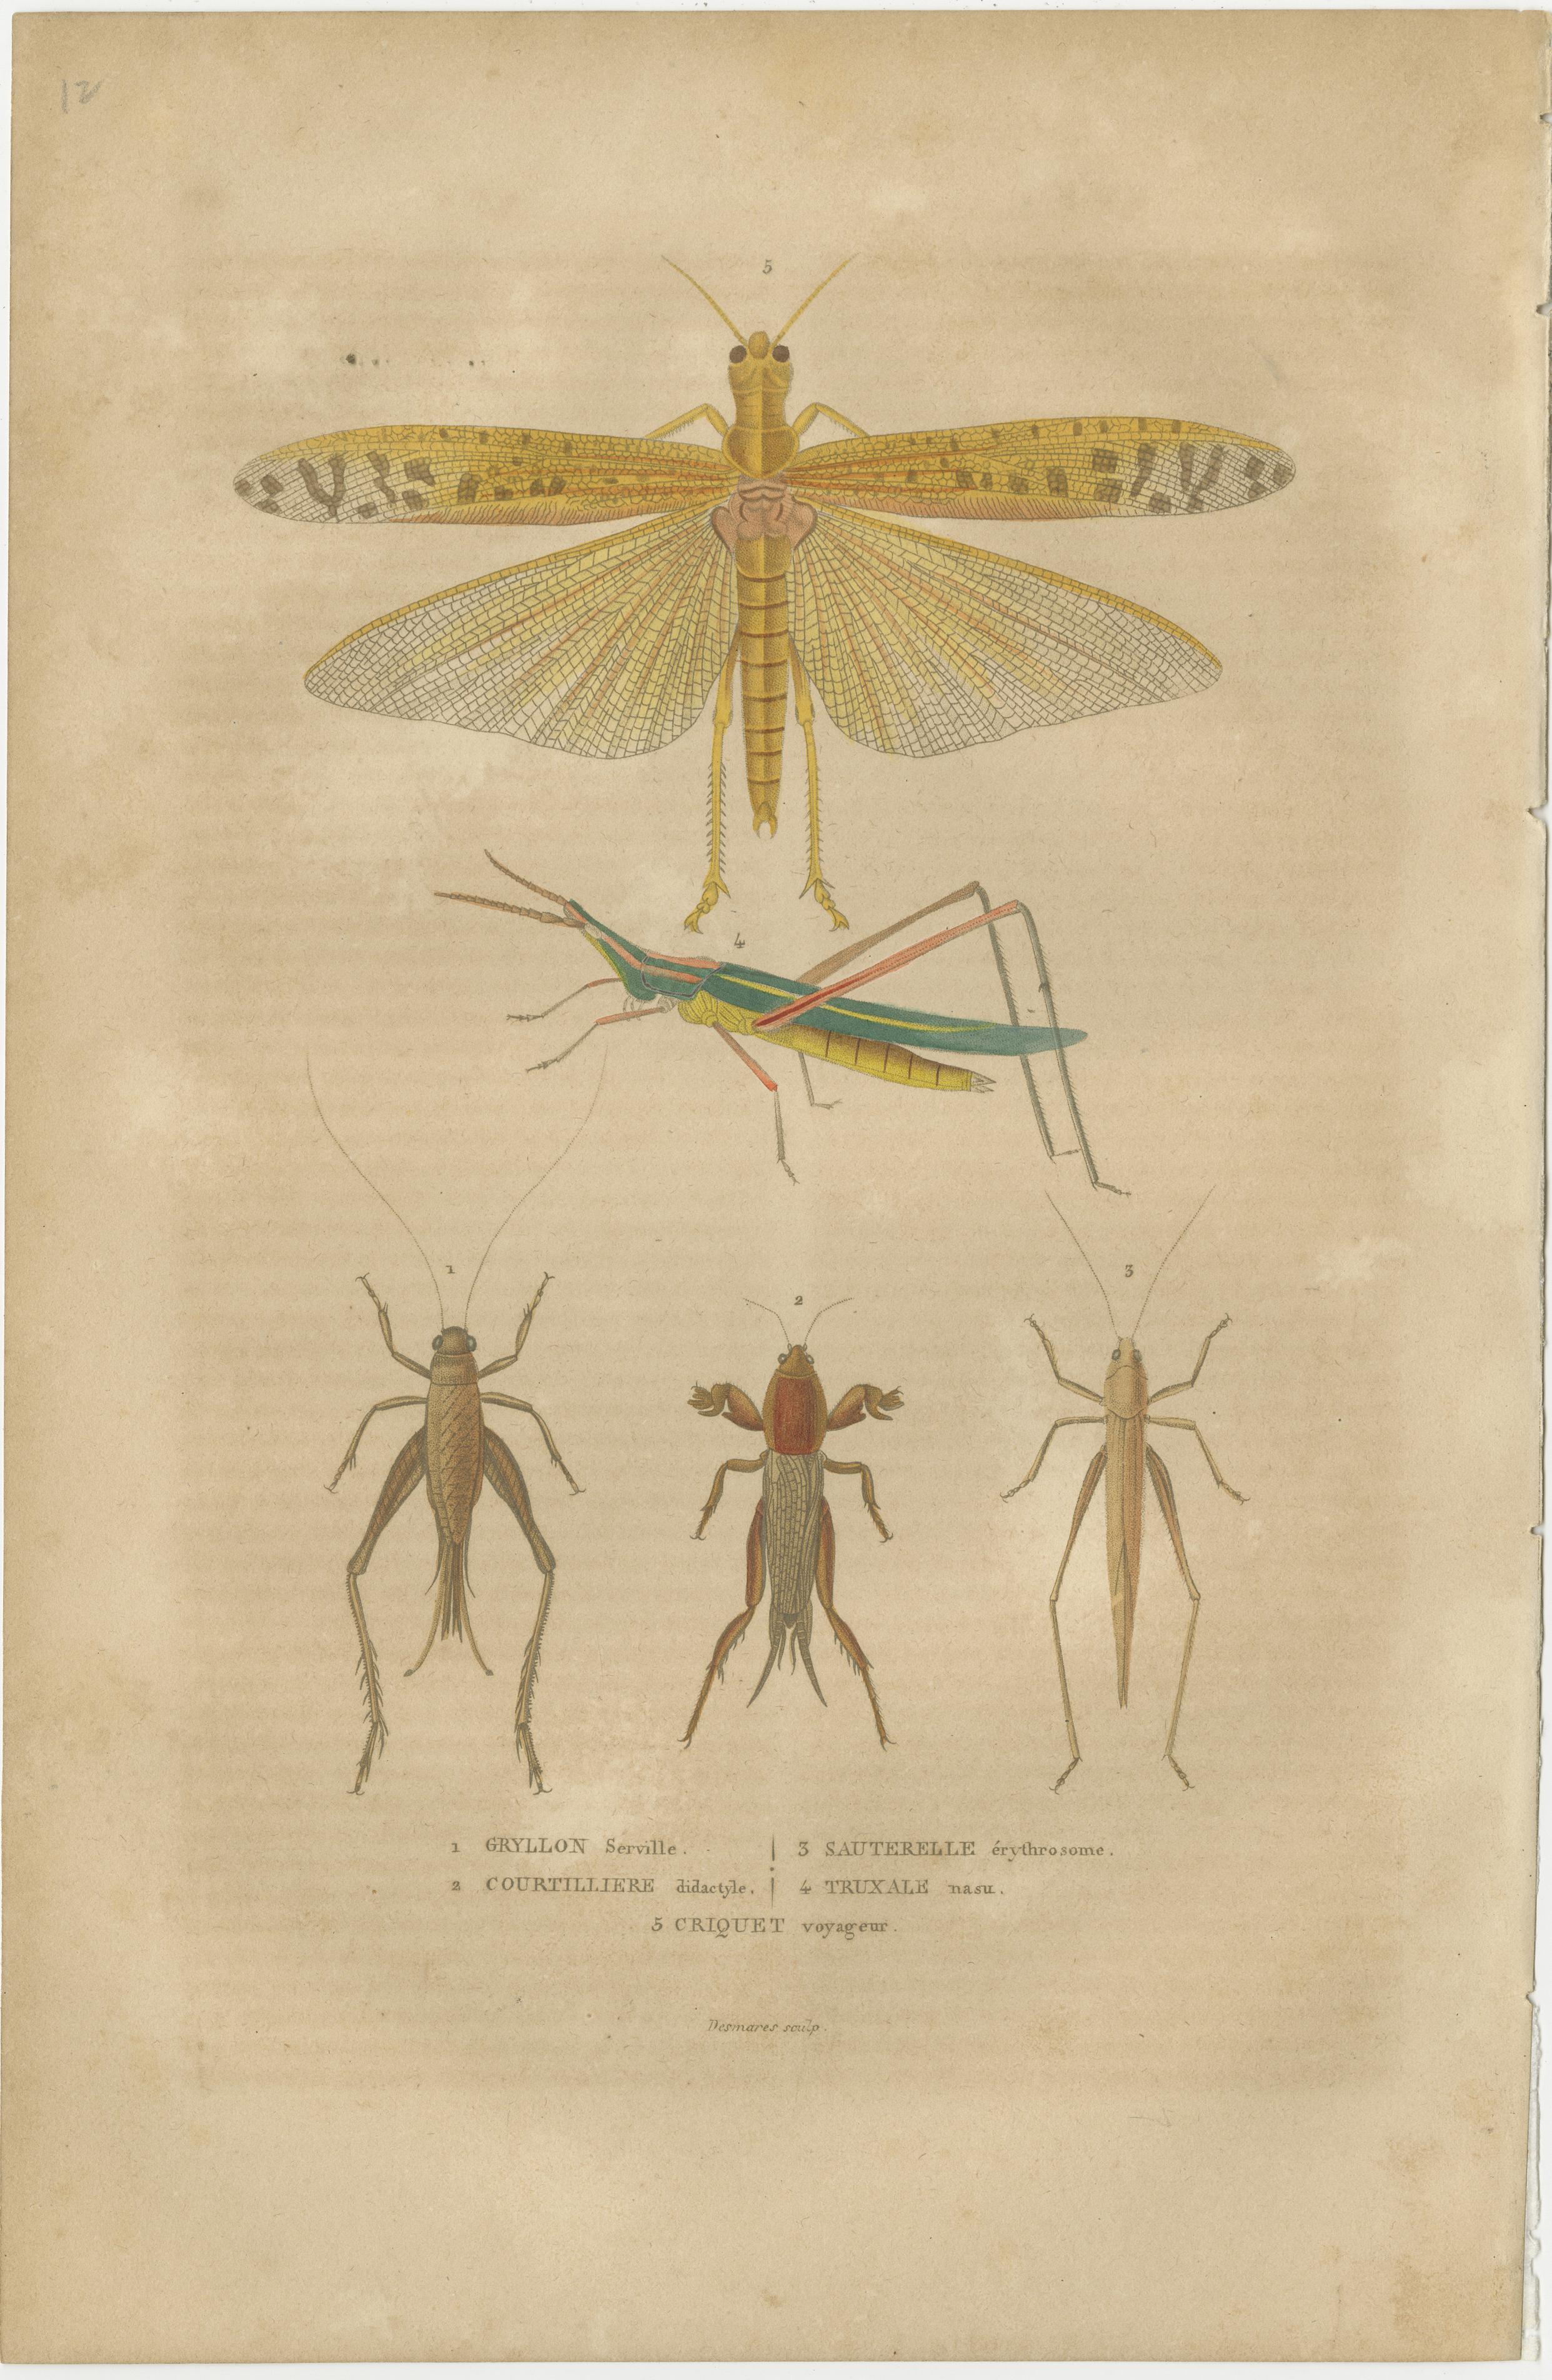 The first print depicts a collection of orthopteran insects, which includes grasshoppers and crickets. These are characterized by their long hind legs for jumping, and in the case of crickets, elongated antennae. The central figure is a large,